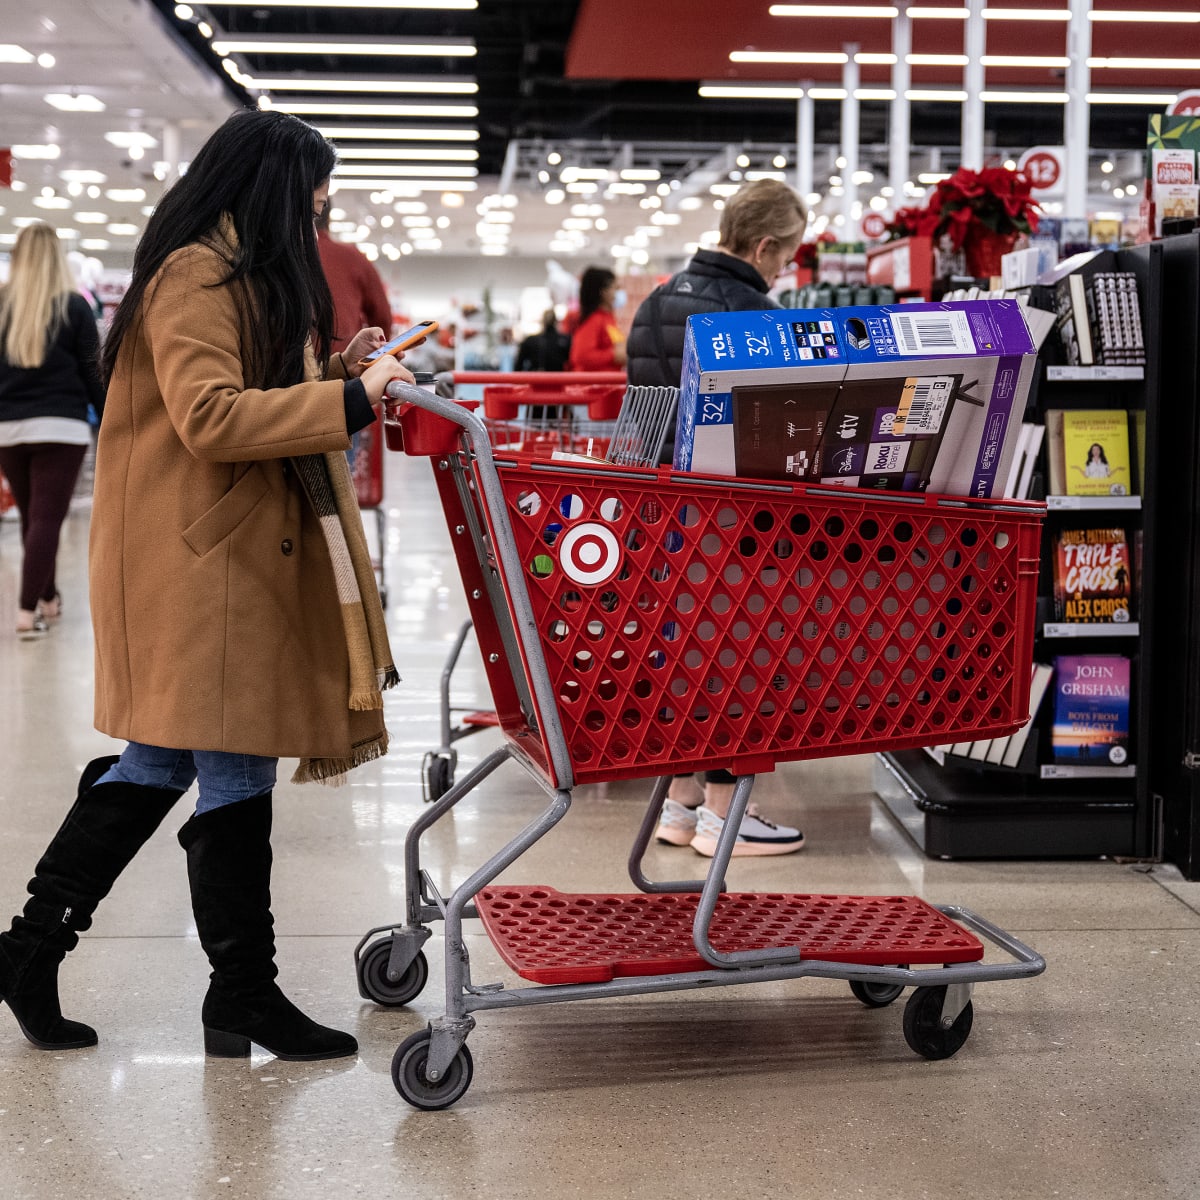 Target Shoppers Are 'Getting Trampled' for a Limited Edition